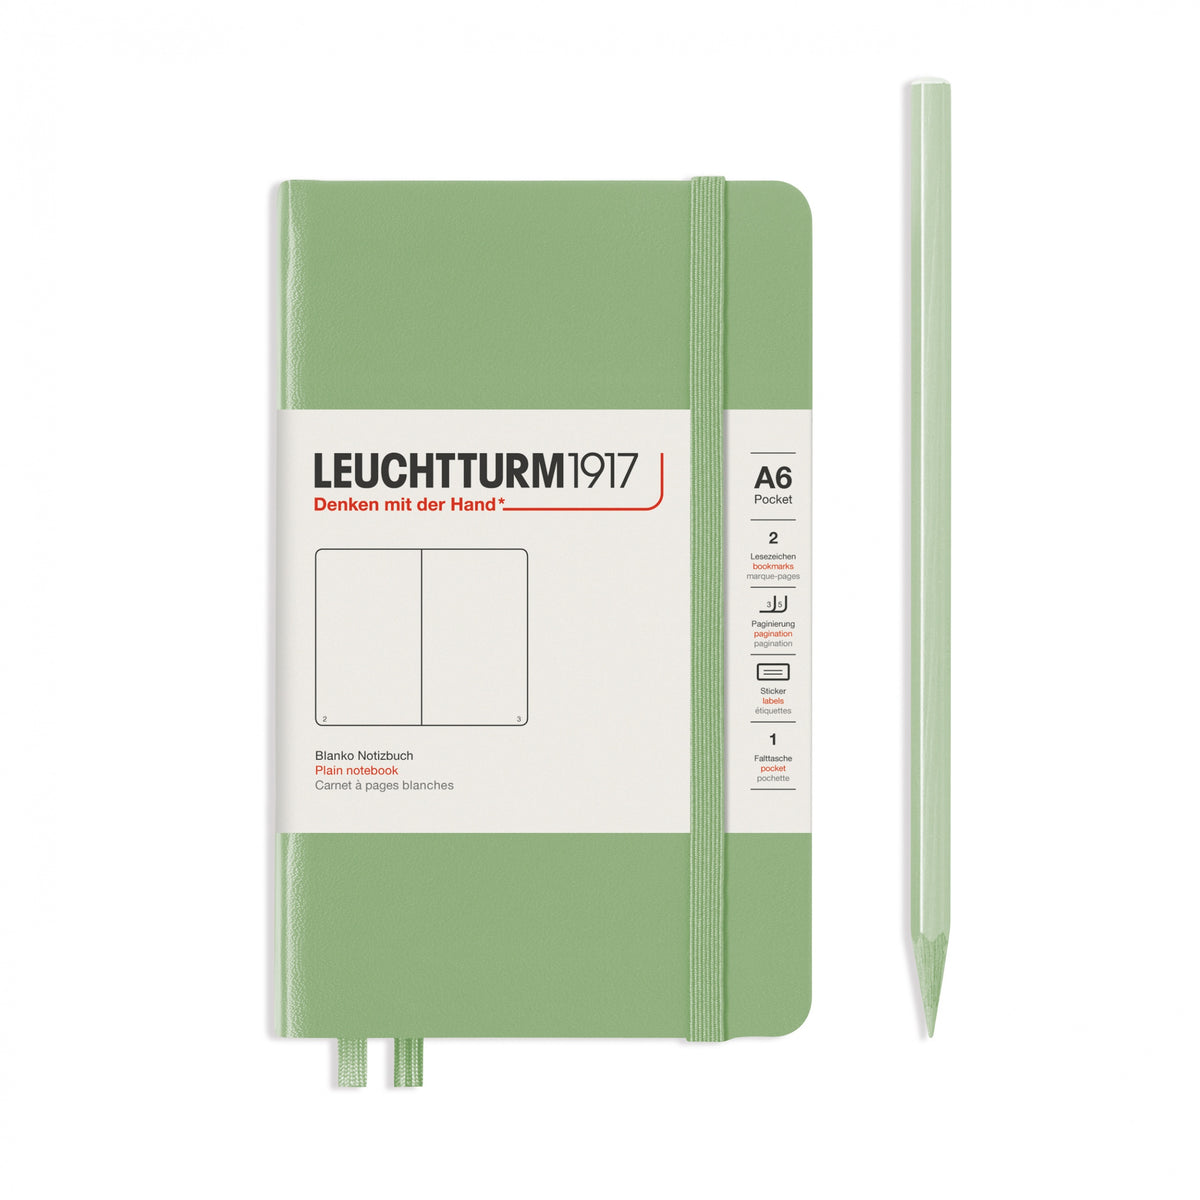 Leuchtturm1917 Notebook A6 Pocket Hardcover in sage green and plain ruling from penny black